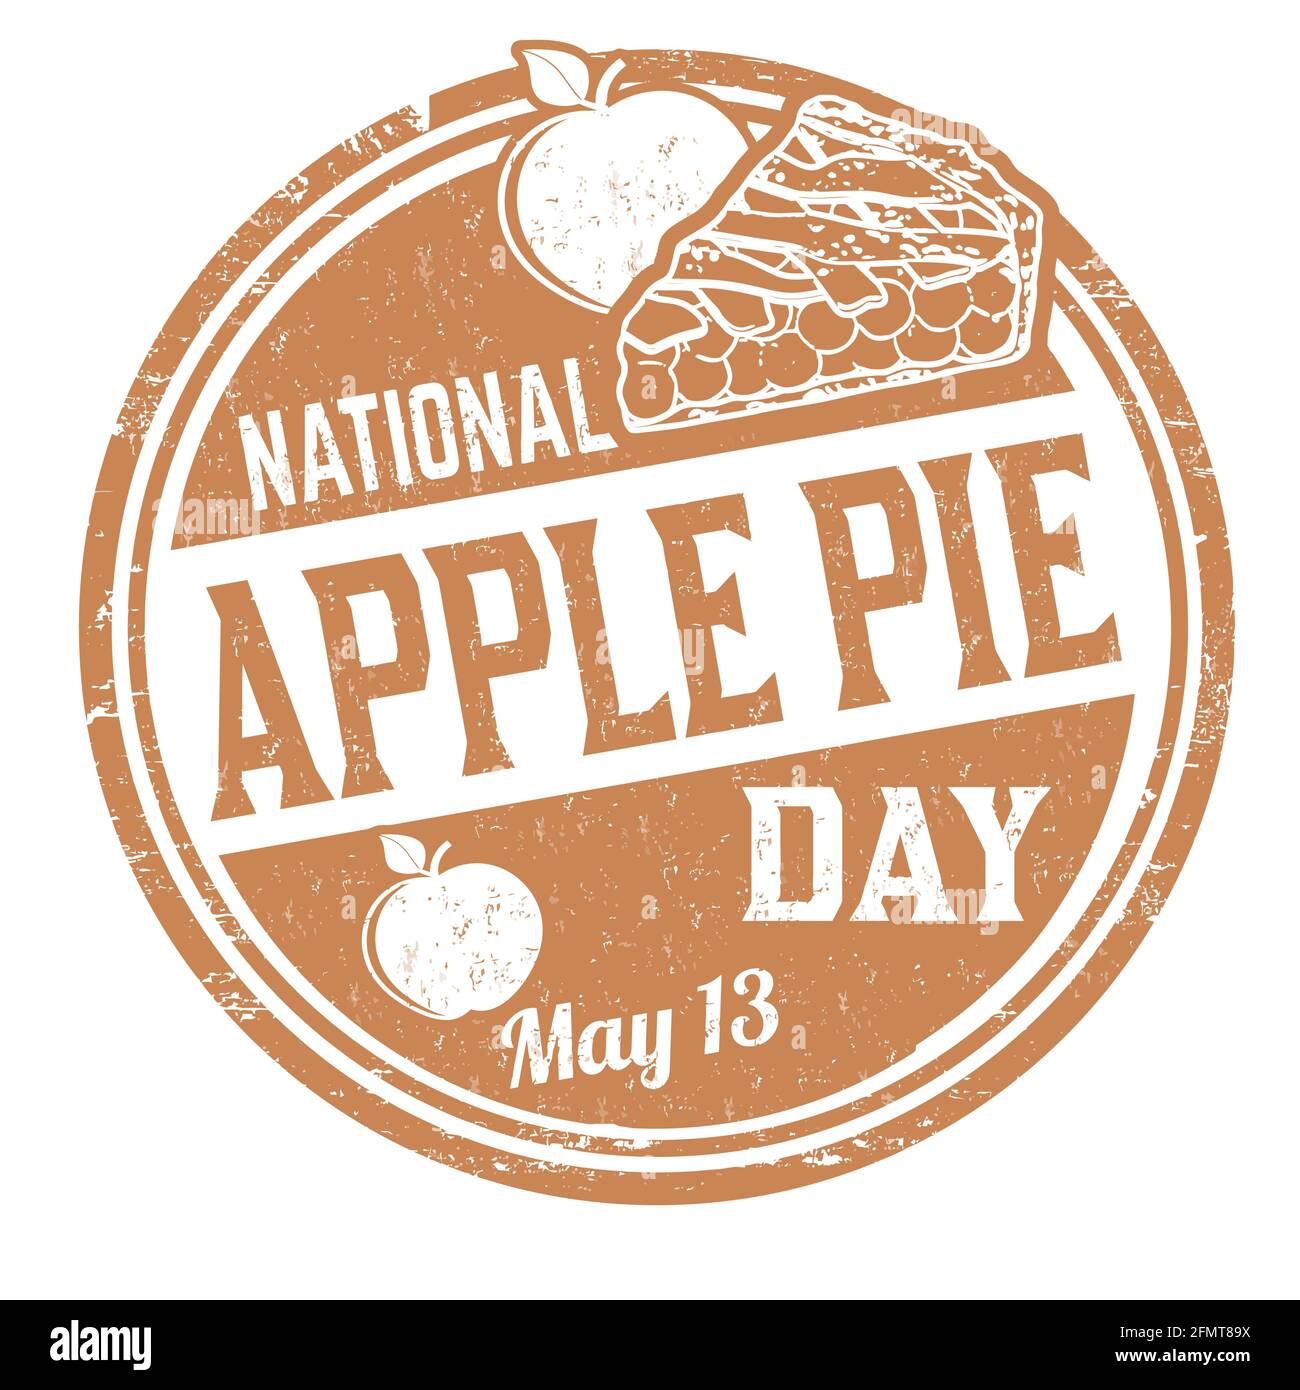 National apple pie day grunge rubber stamp on white background, vector